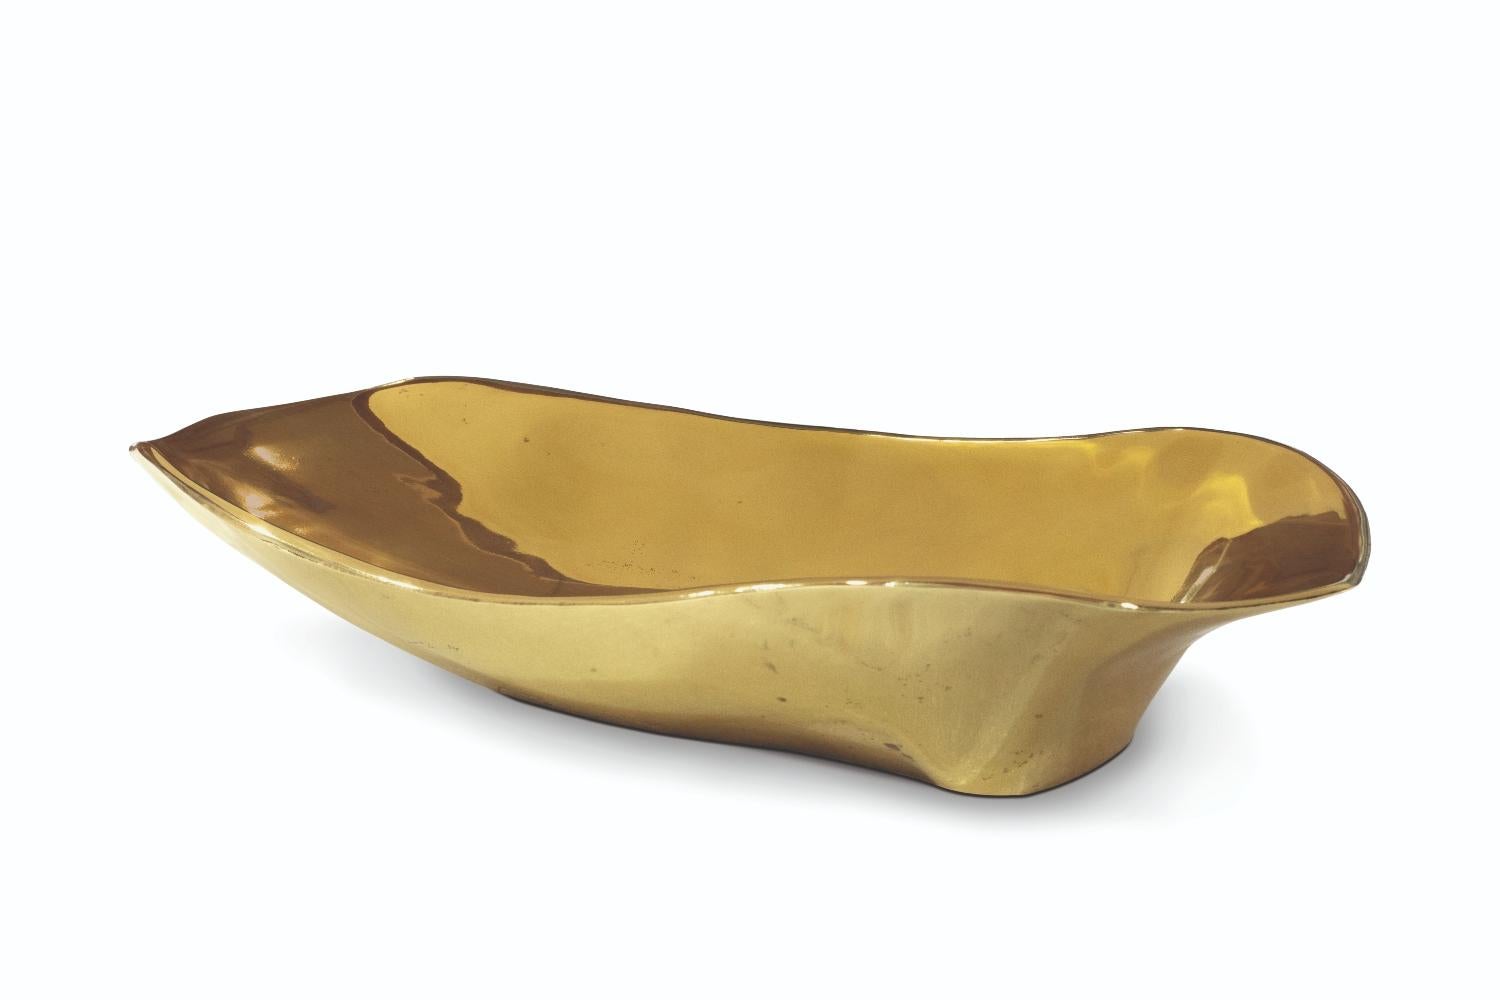 The Lapiaz vessel sink made of casted brass can be gold, nickel and copper-plated or even lacquered in any color. This irregular shaped piece will add to your bathroom the modern look you are searching for. You are able to combine it with many